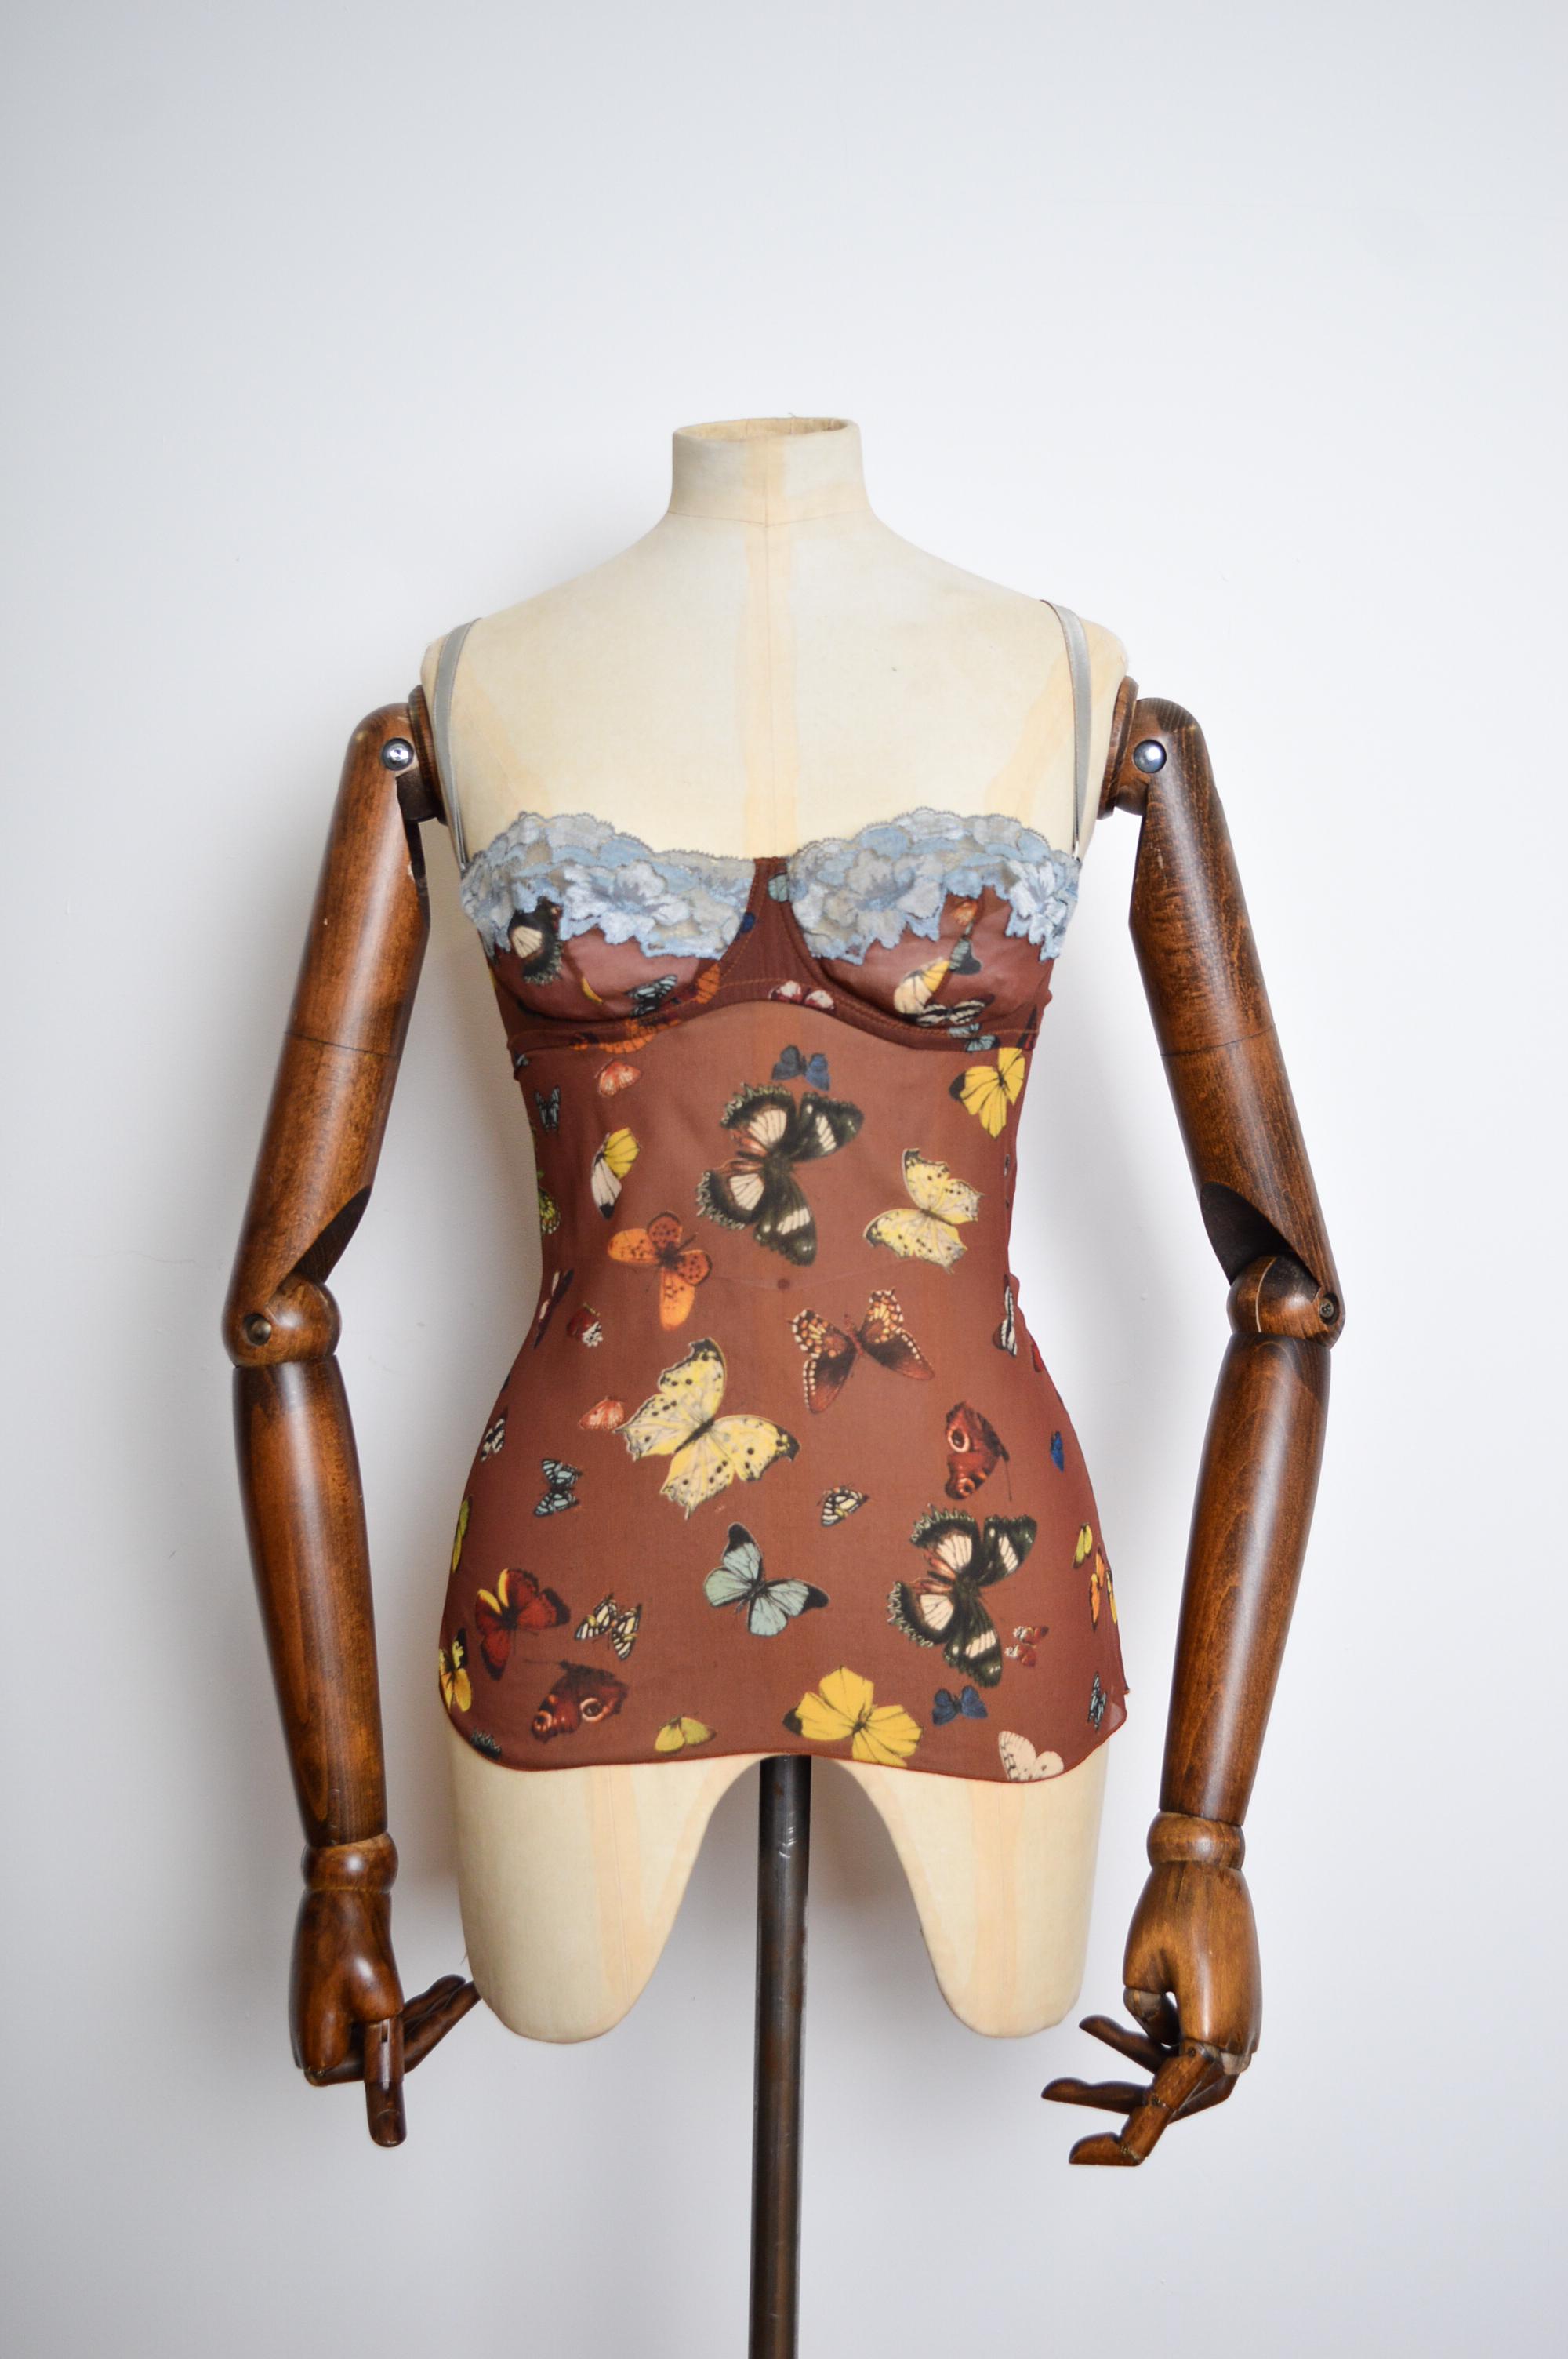 2000's Vintage Silk Butterfly patterned Corset designed by DOLCE & GABBANA.   

MADE IN ITALY.   

This beautiful bustier is crafted from a sheer brown silk with a dusty blue lace trim.   

79% Silk
7% Elasthane
14% Polyamide 
(Stretchy) 